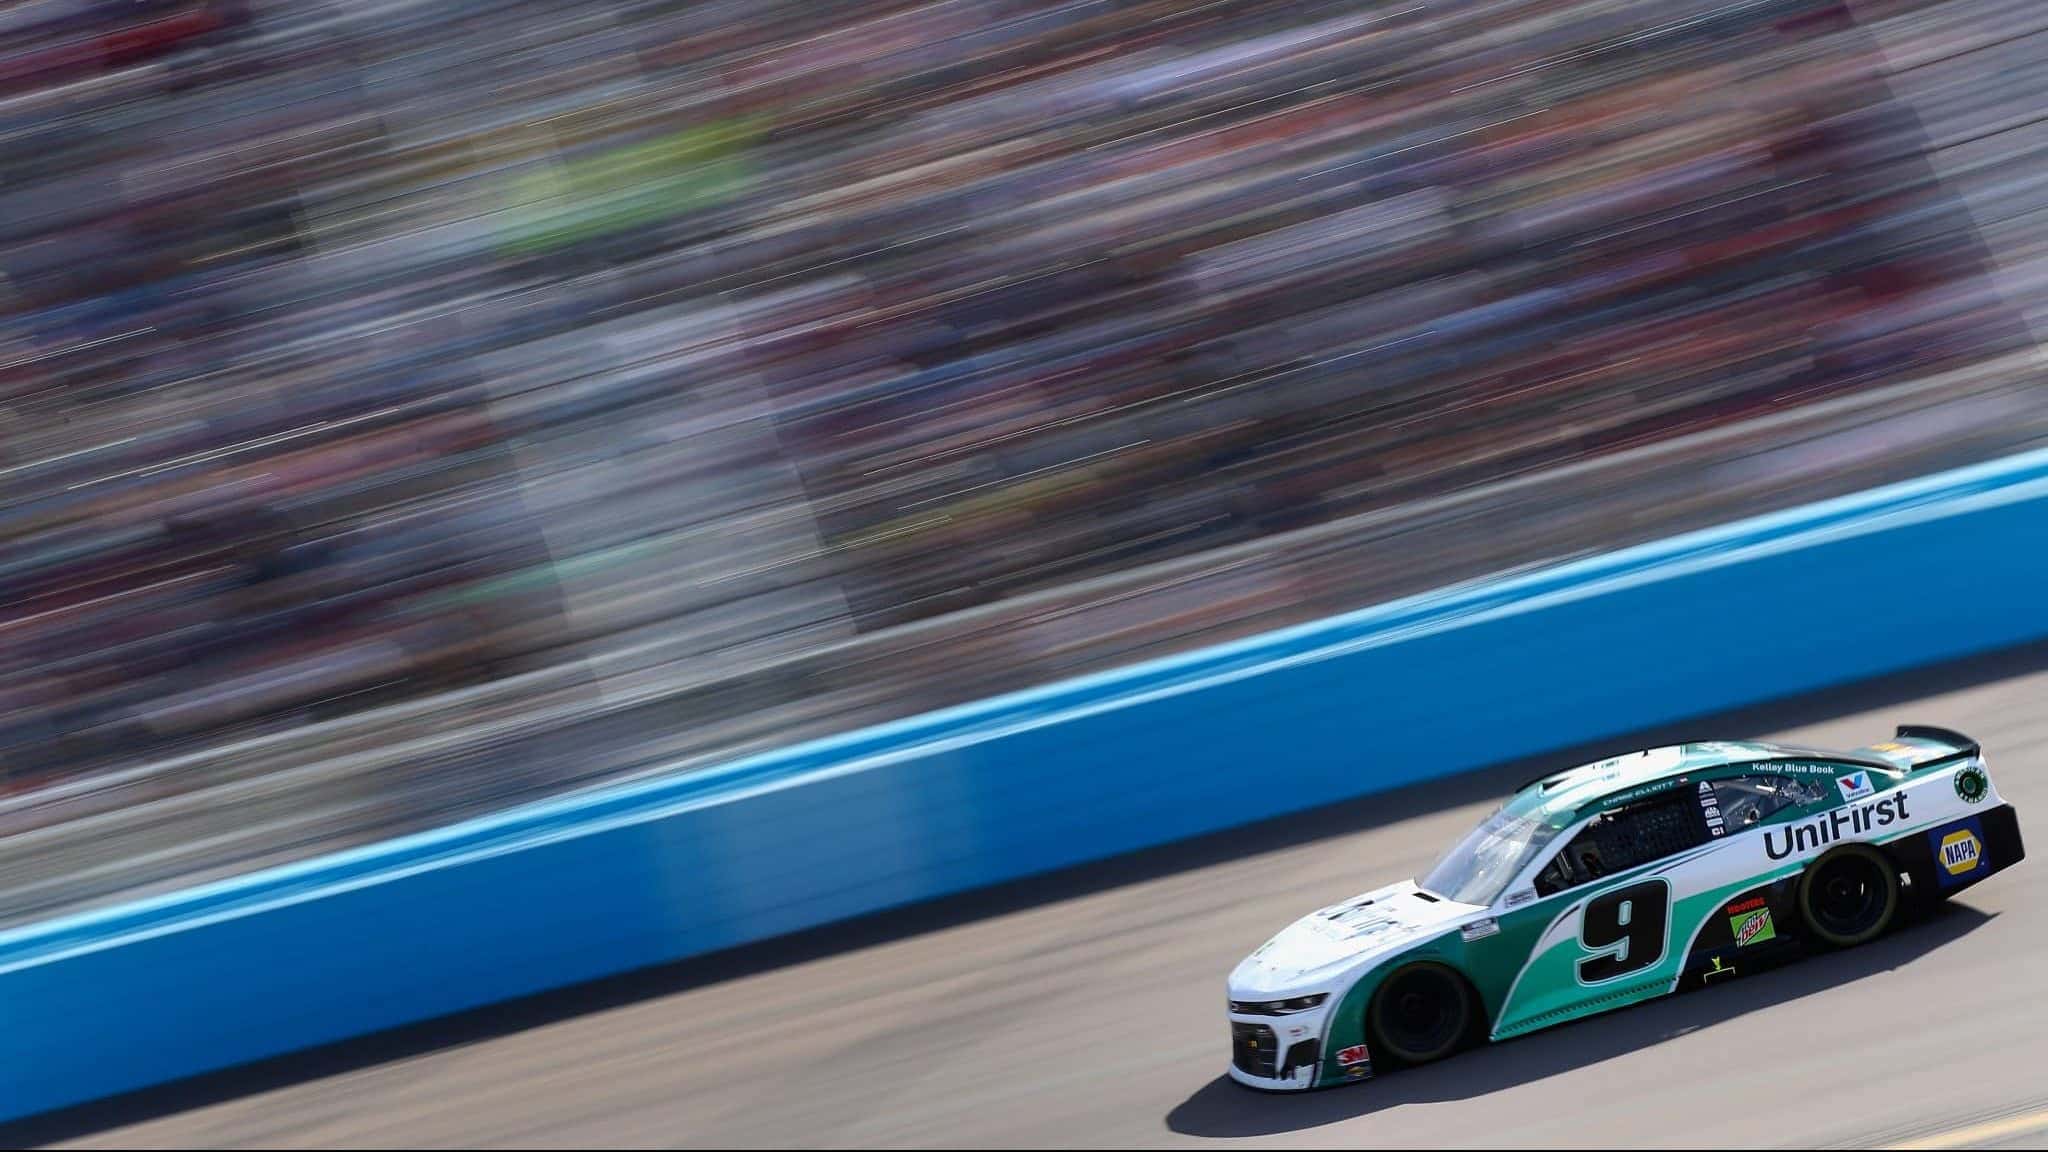 AVONDALE, ARIZONA - MARCH 08: Chase Elliott, driver of the #9 UniFirst Chevrolet, drives during the NASCAR Cup Series FanShield 500 at Phoenix Raceway on March 08, 2020 in Avondale, Arizona.